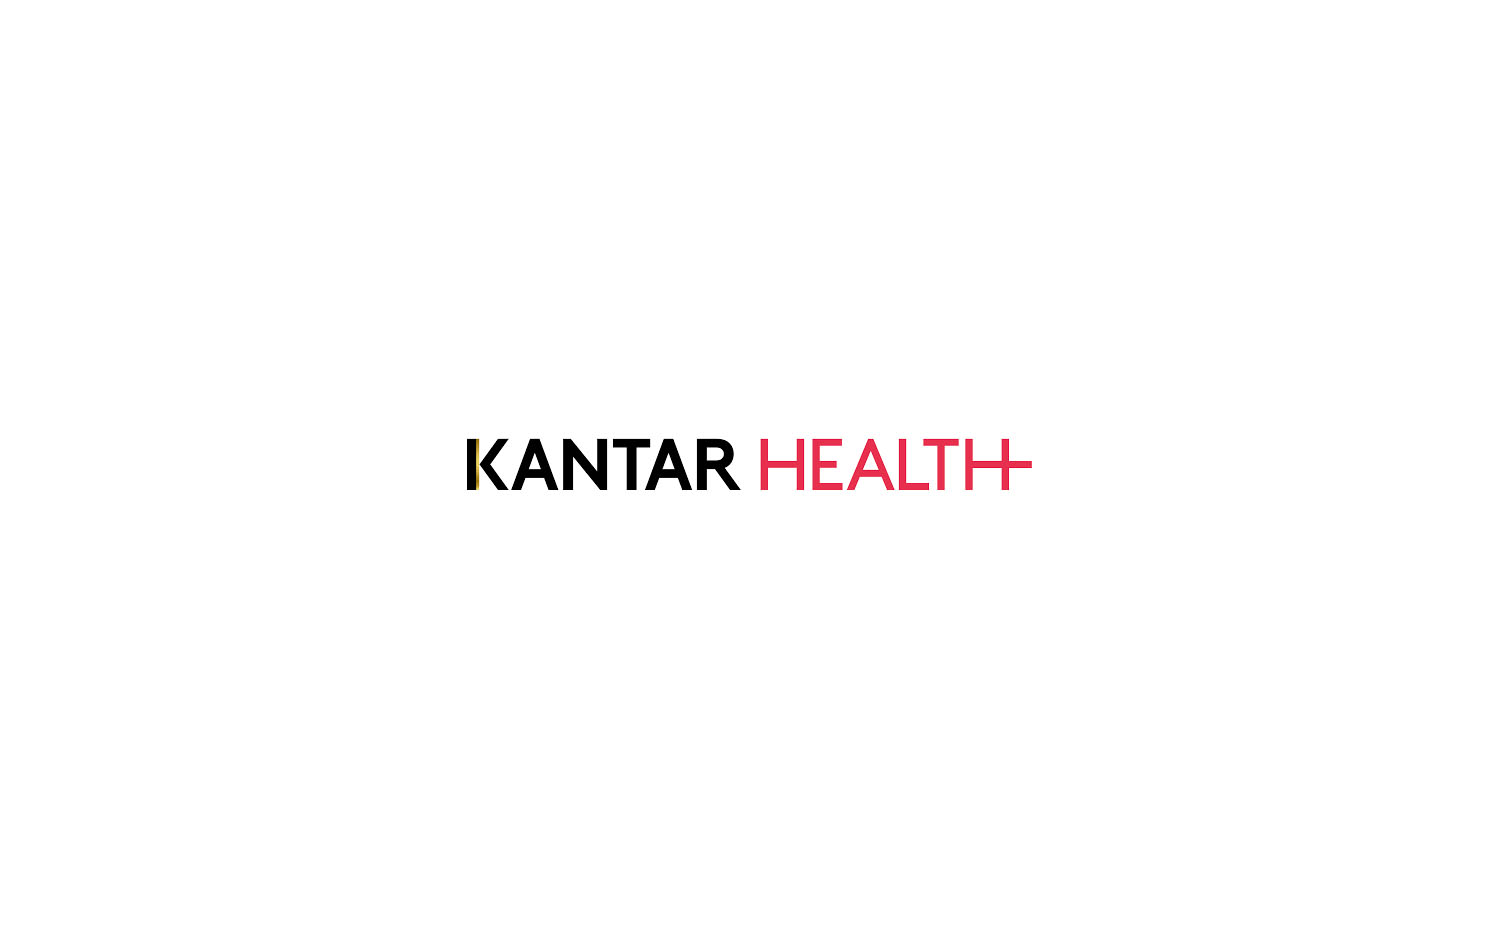 Lumi and Kantar Health Introduce Mobile Survey App to Leverage mHealth Technology